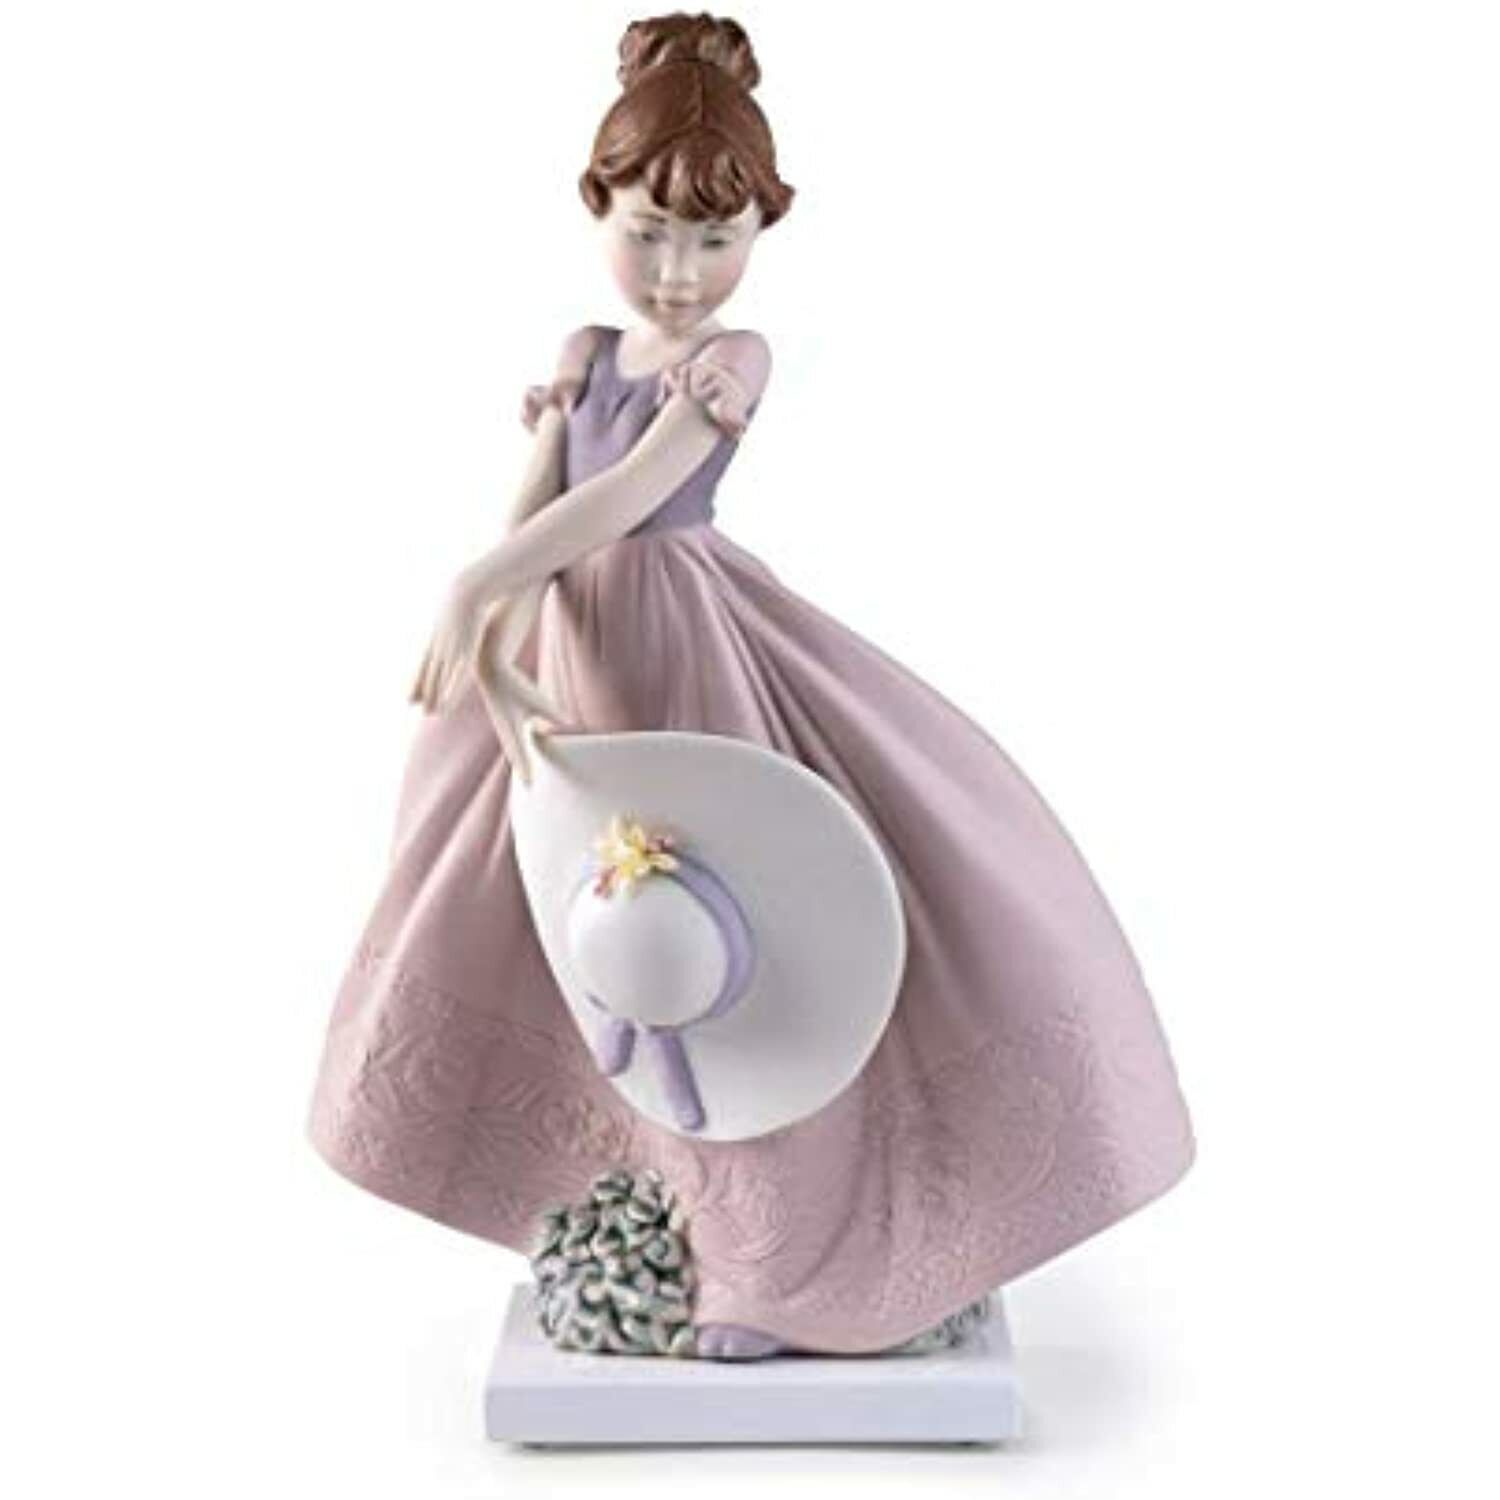 Lladró Lladro Straw Hat in The Wind Porcelain Figurine Limited Edition 1009533